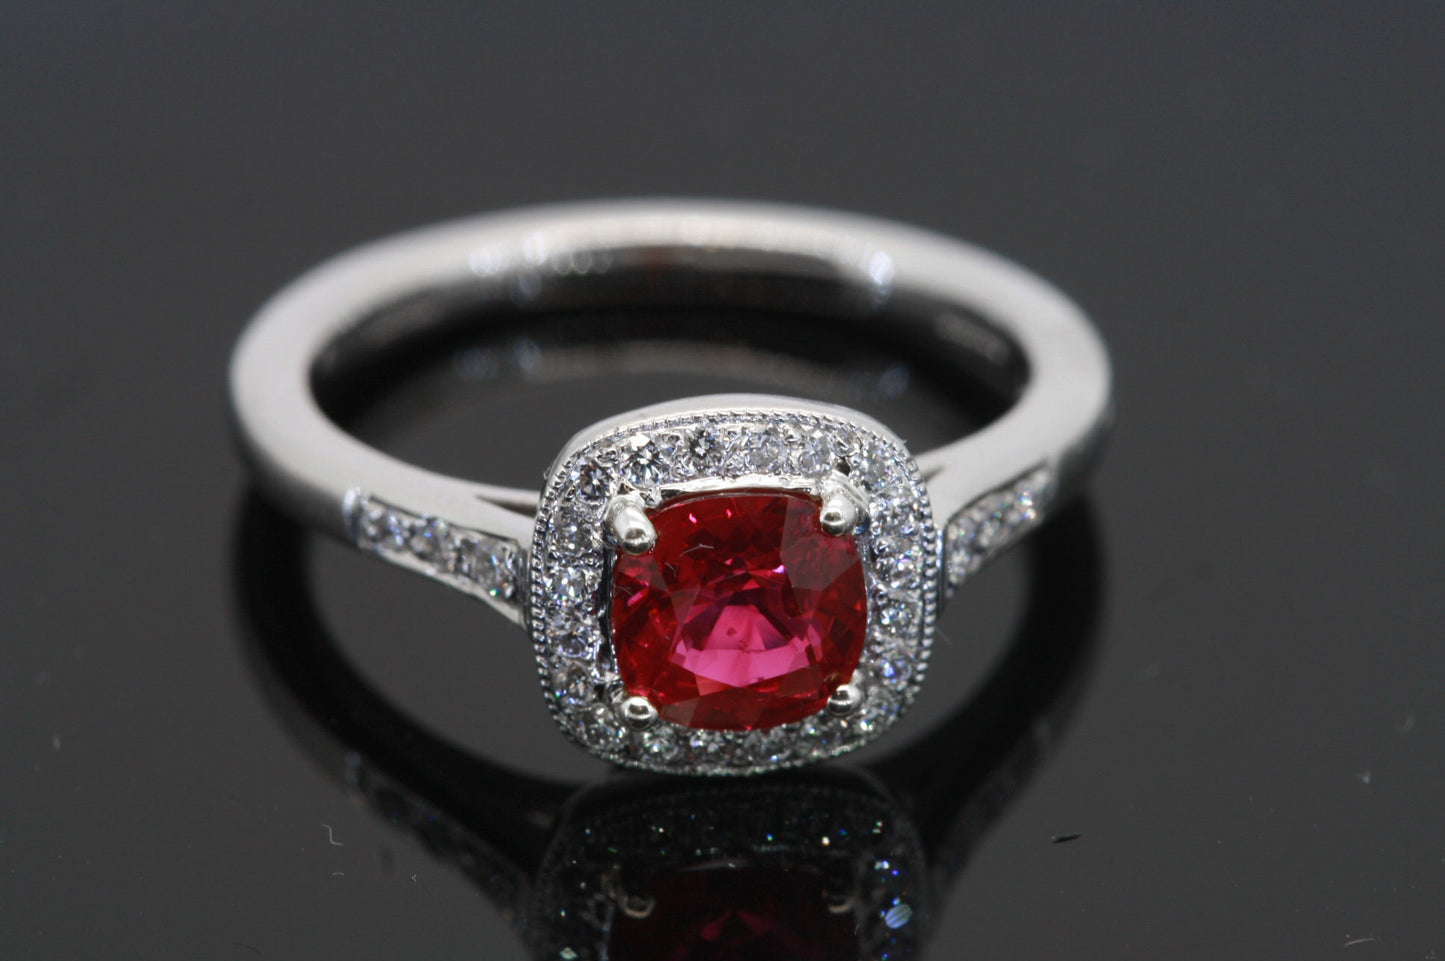 Anniversary Wedding Ring, Bridal Woman Anniversary Gift, 2.00 Carat Cushion Cut Red Ruby, Diamond Engagement Ring, Mother's Day Gift